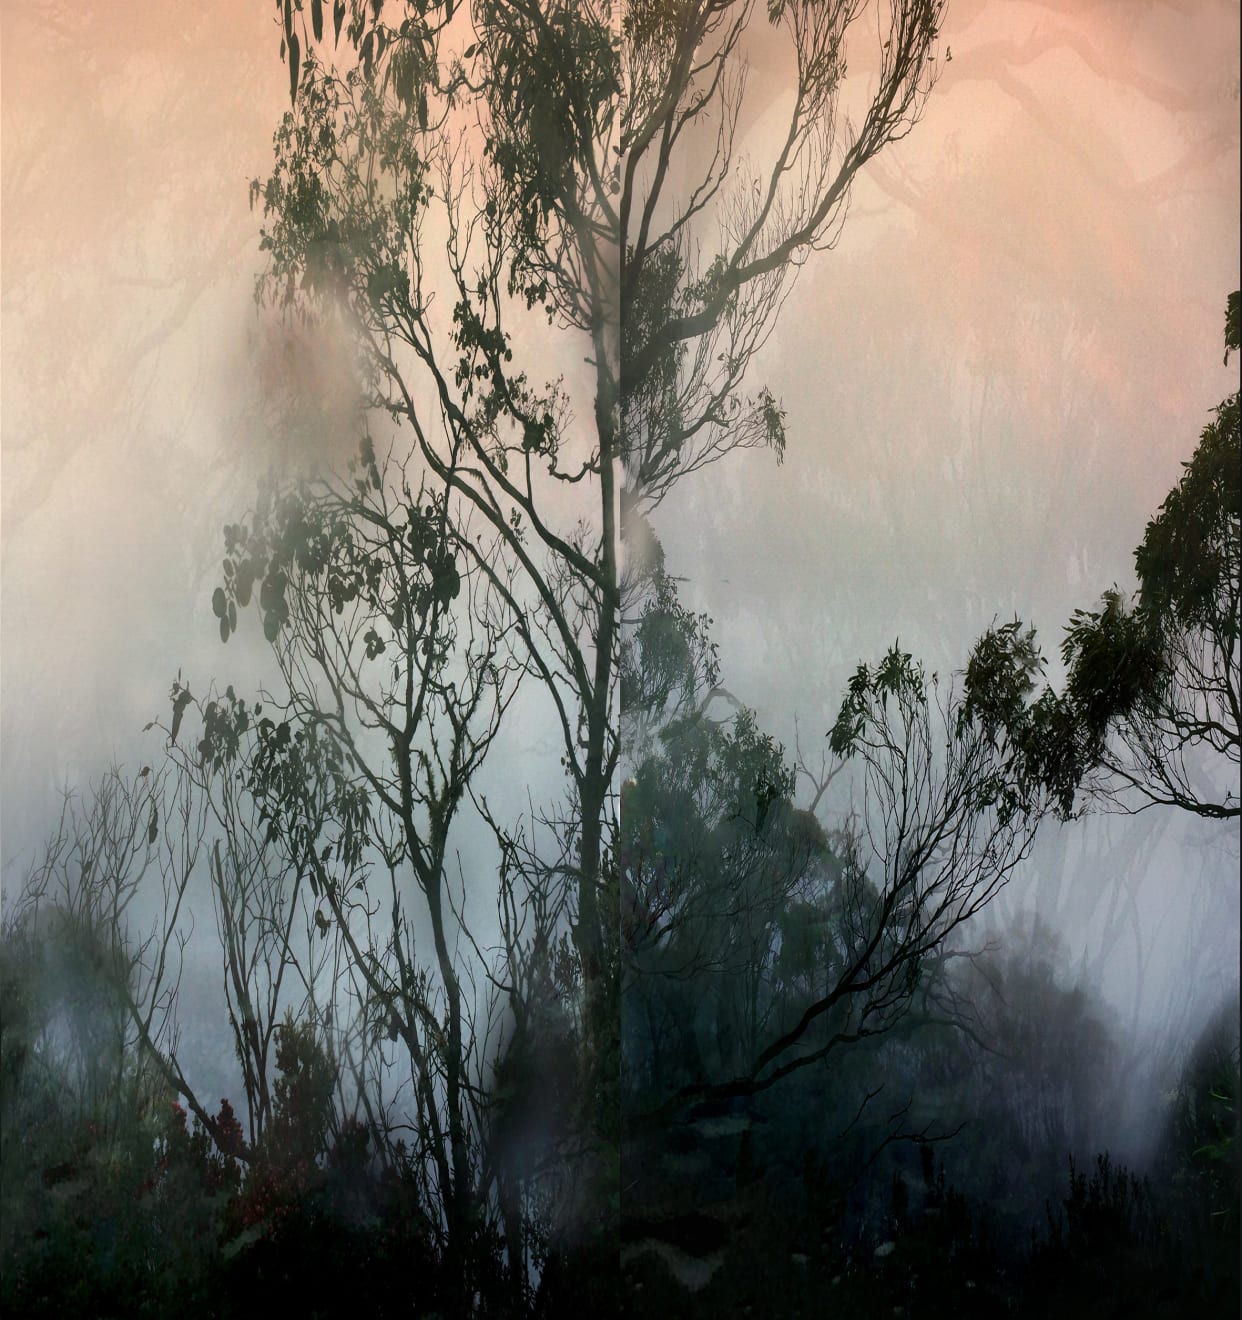 Movement III Archival Pigment Print Limited Edition 10 90 x 95 cm $1700 £850